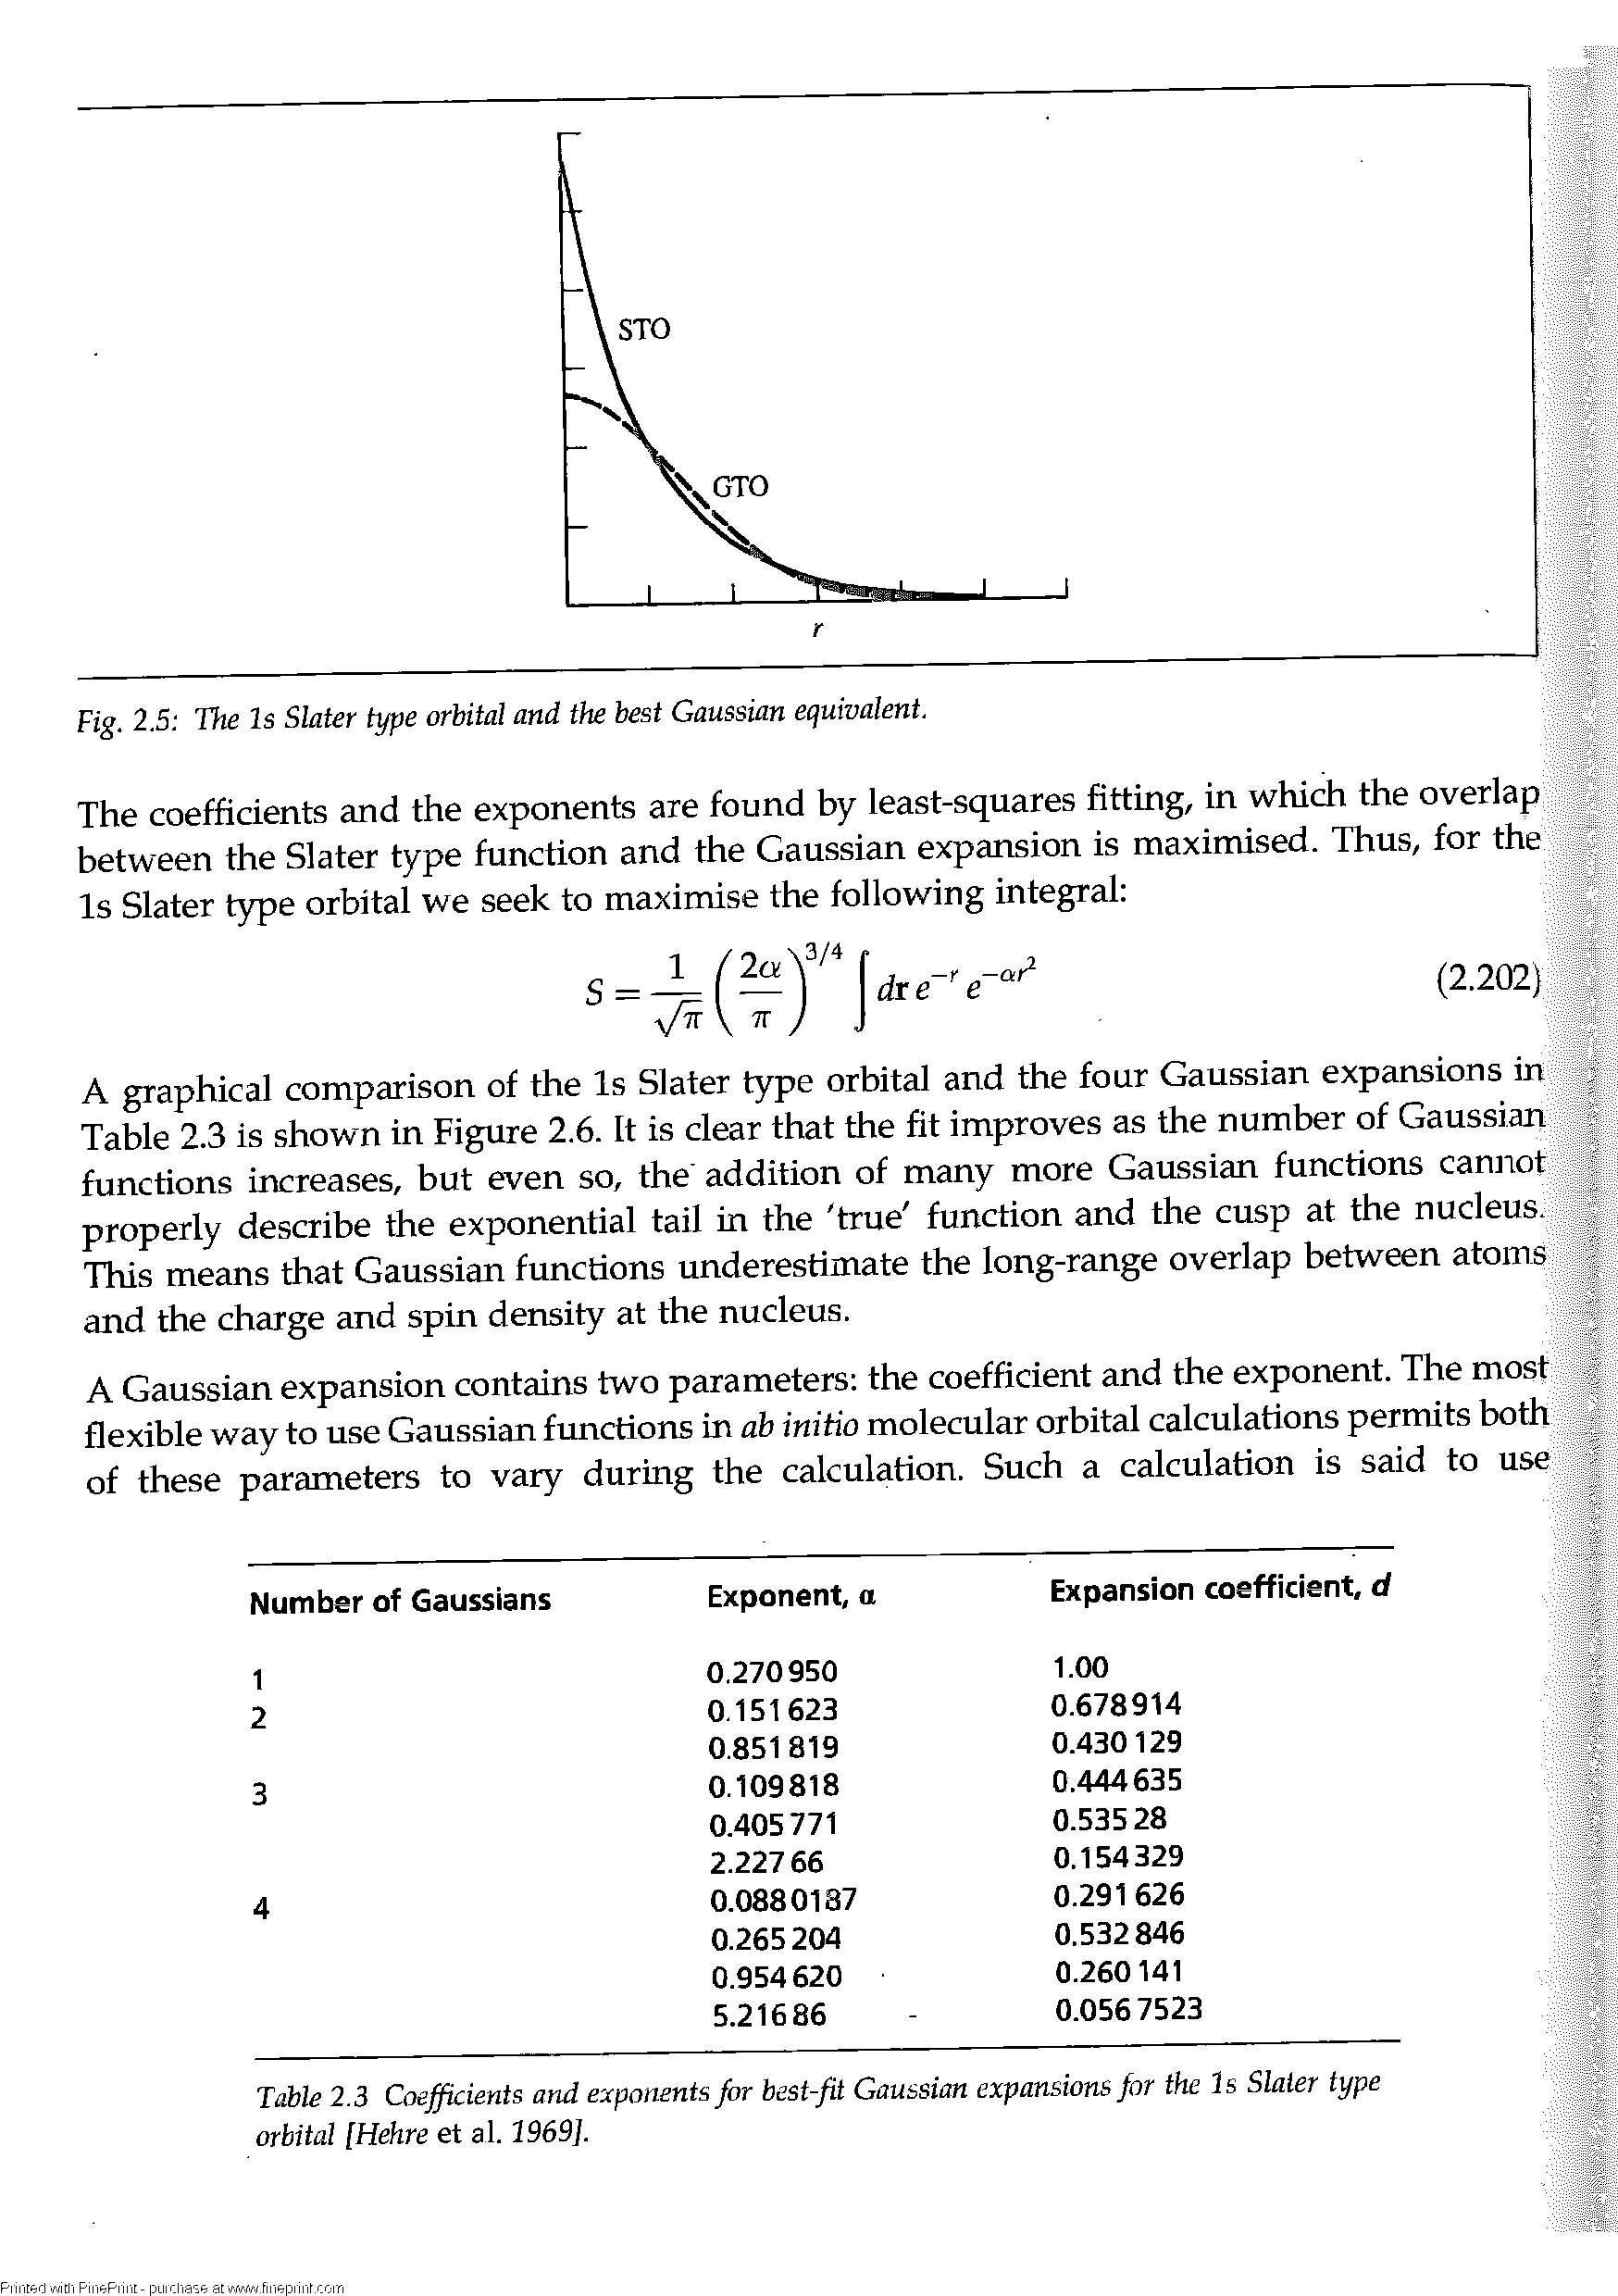 Table 2.3 Coefficients and e-xponents for best-fit Gaussian expansions for the Is Slater type orbital [Hehre et al. 1969].